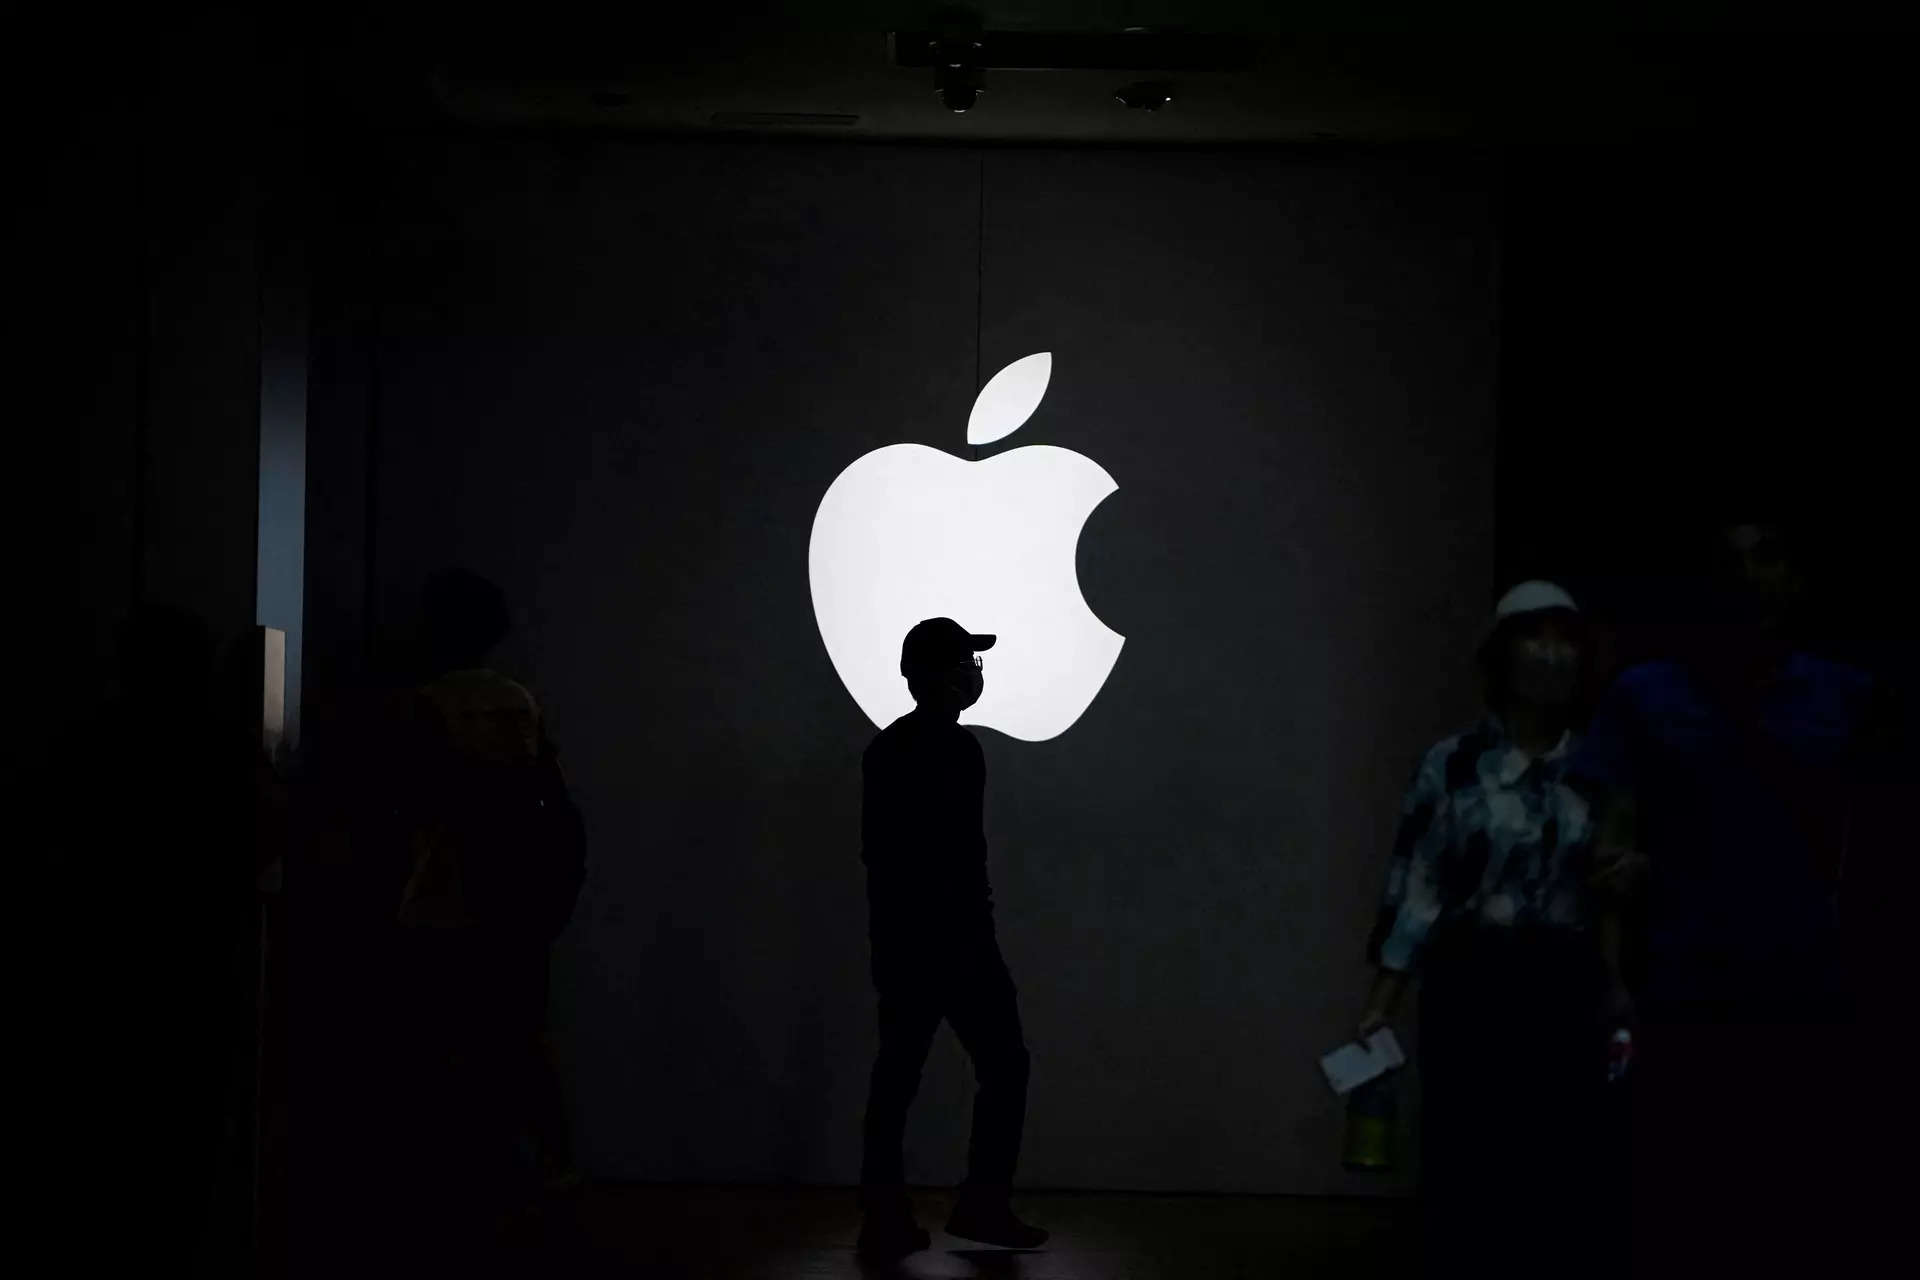 'Apple may employ 5 lakh people in India in 3 years': Govt sources 